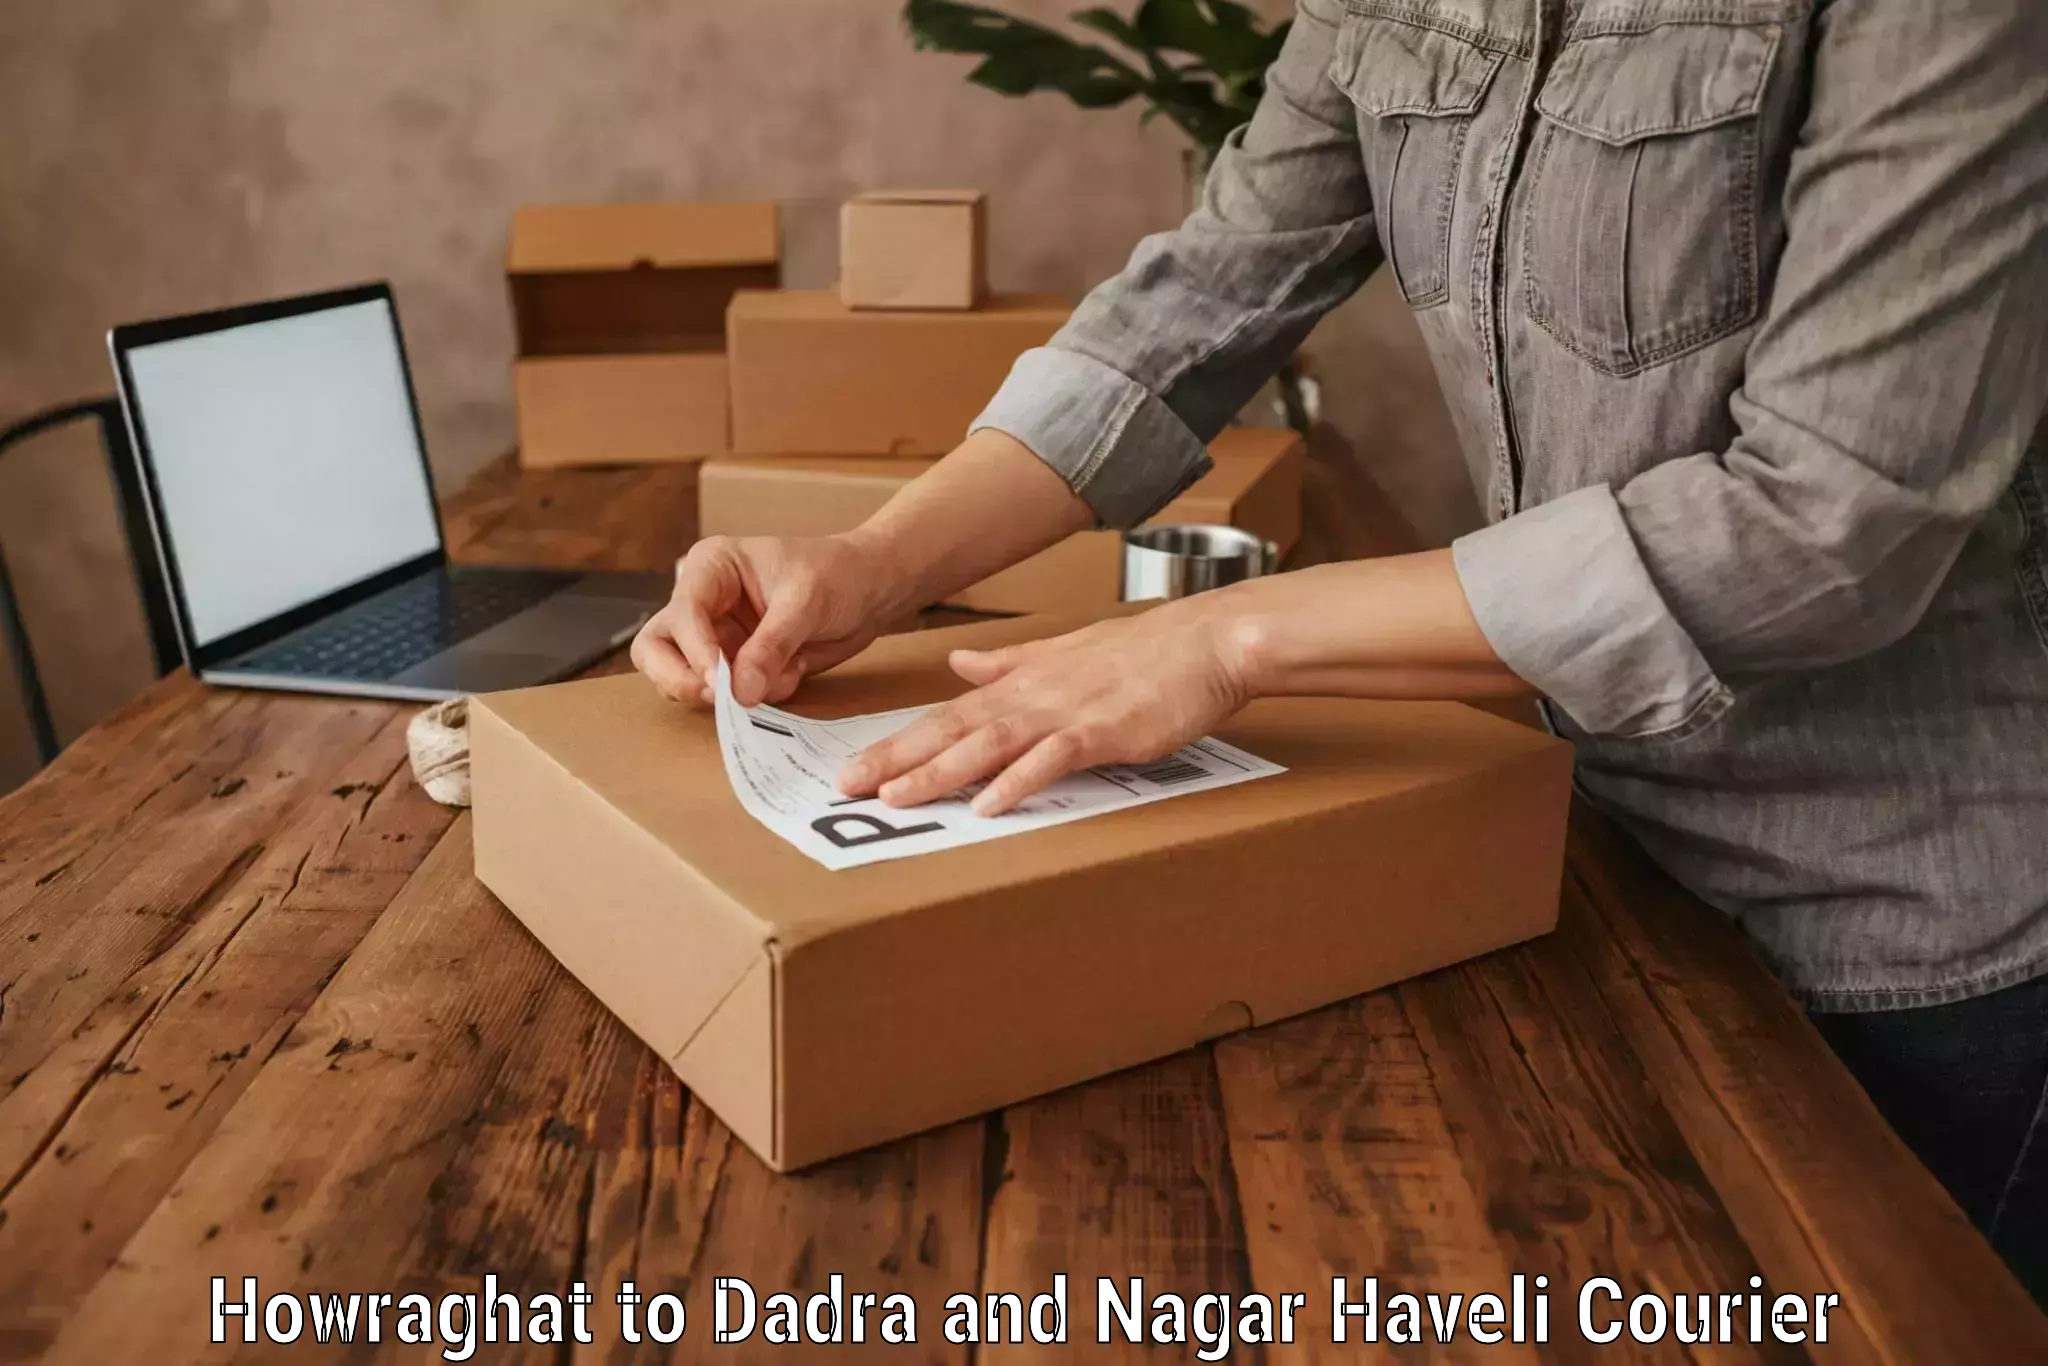 Online luggage shipping booking Howraghat to Dadra and Nagar Haveli